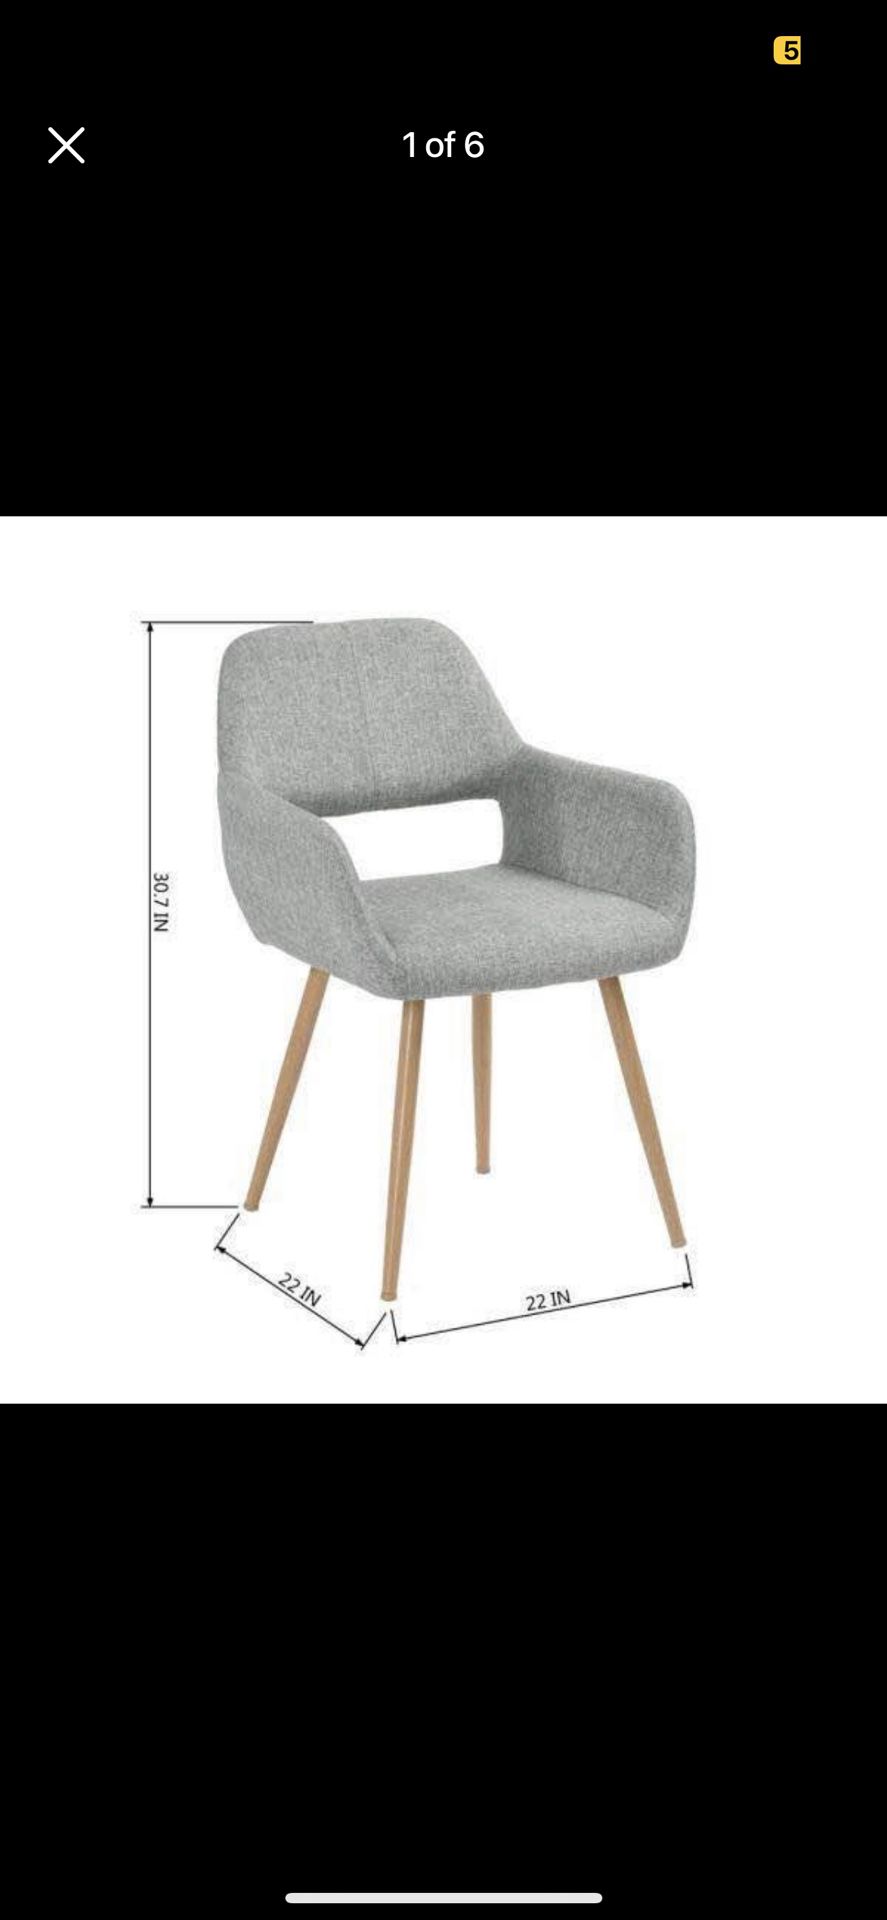 Cromwell Grey Fabric Upholstered Arm Dining Chairs